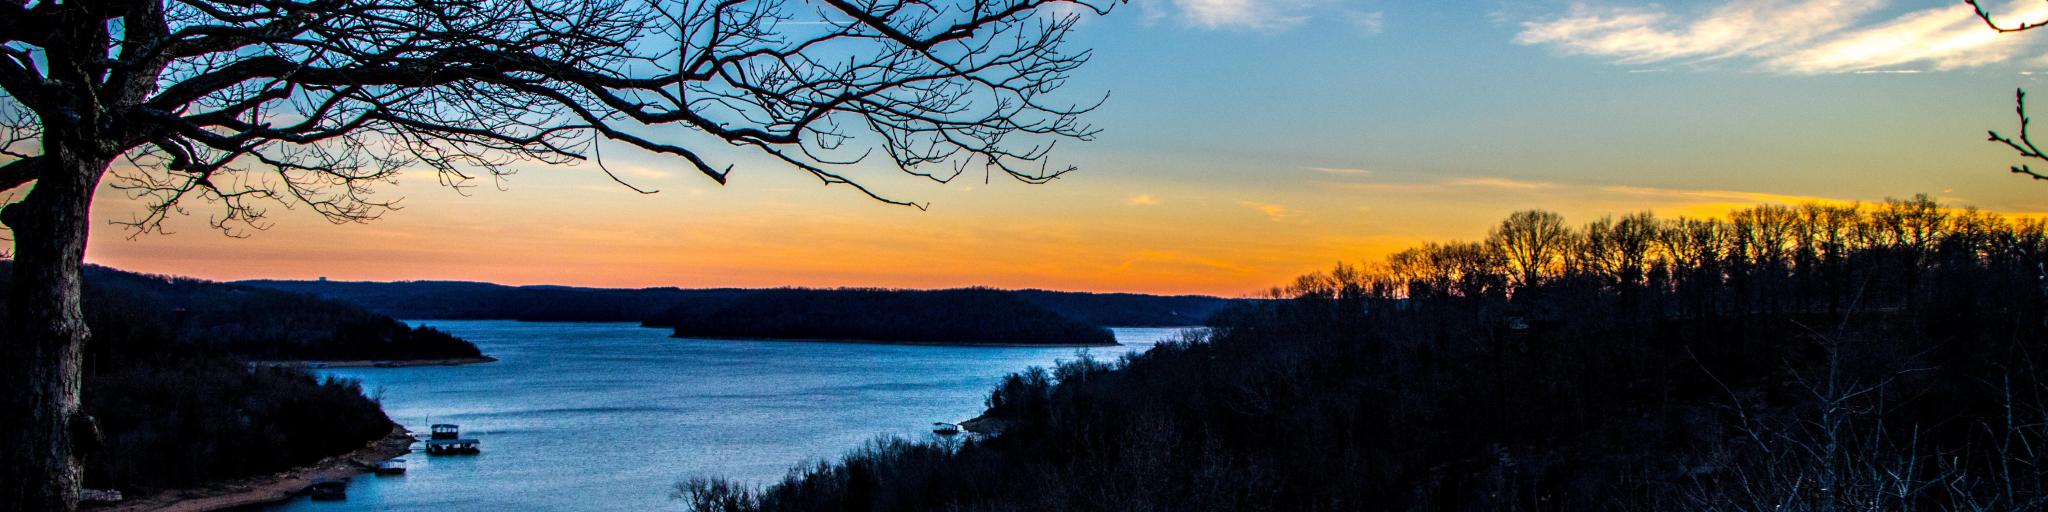 Eureka springs sunset at lake with trees in the foreground